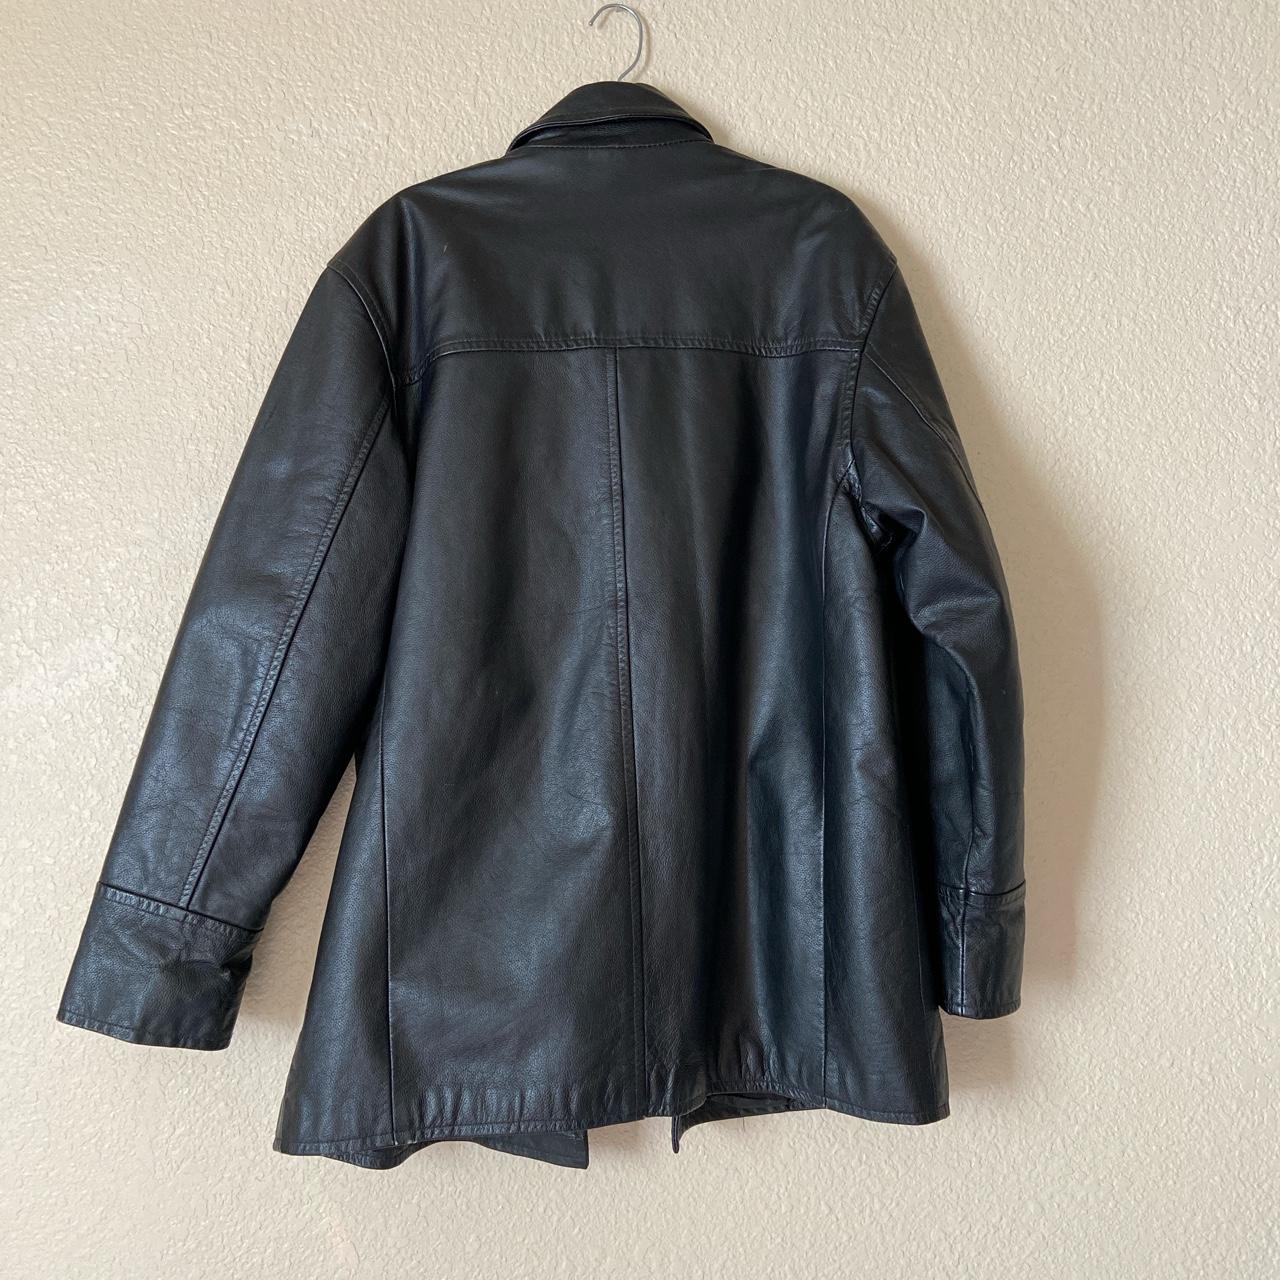 Phase 2 men’s leather coat with light... - Depop